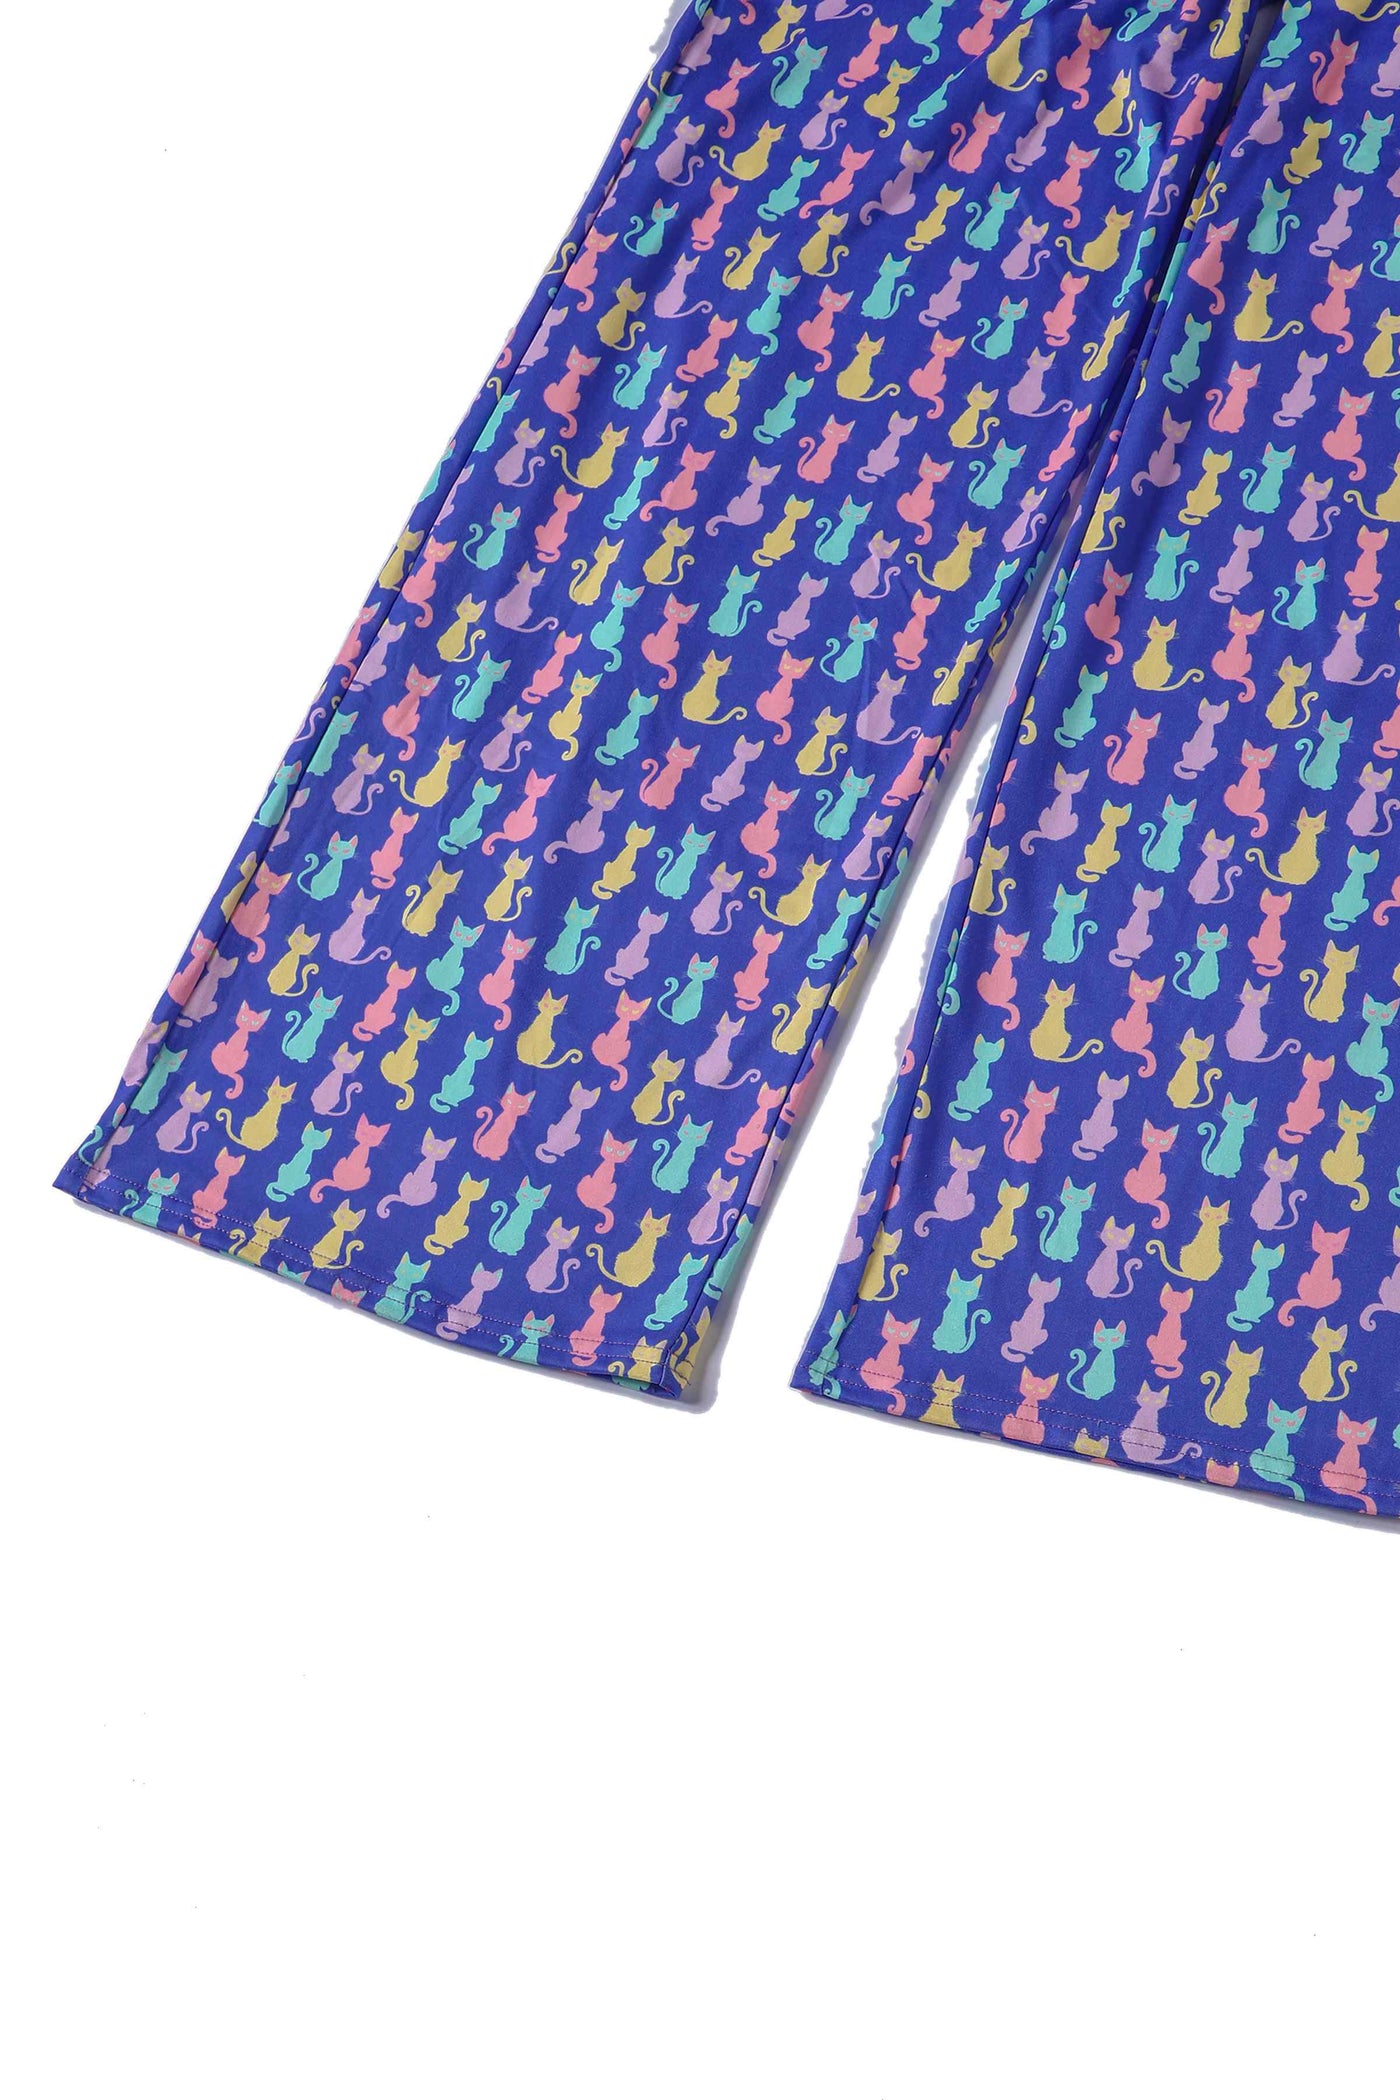 Close up View of Quirky Purple Rainbow Cat Jumpsuit